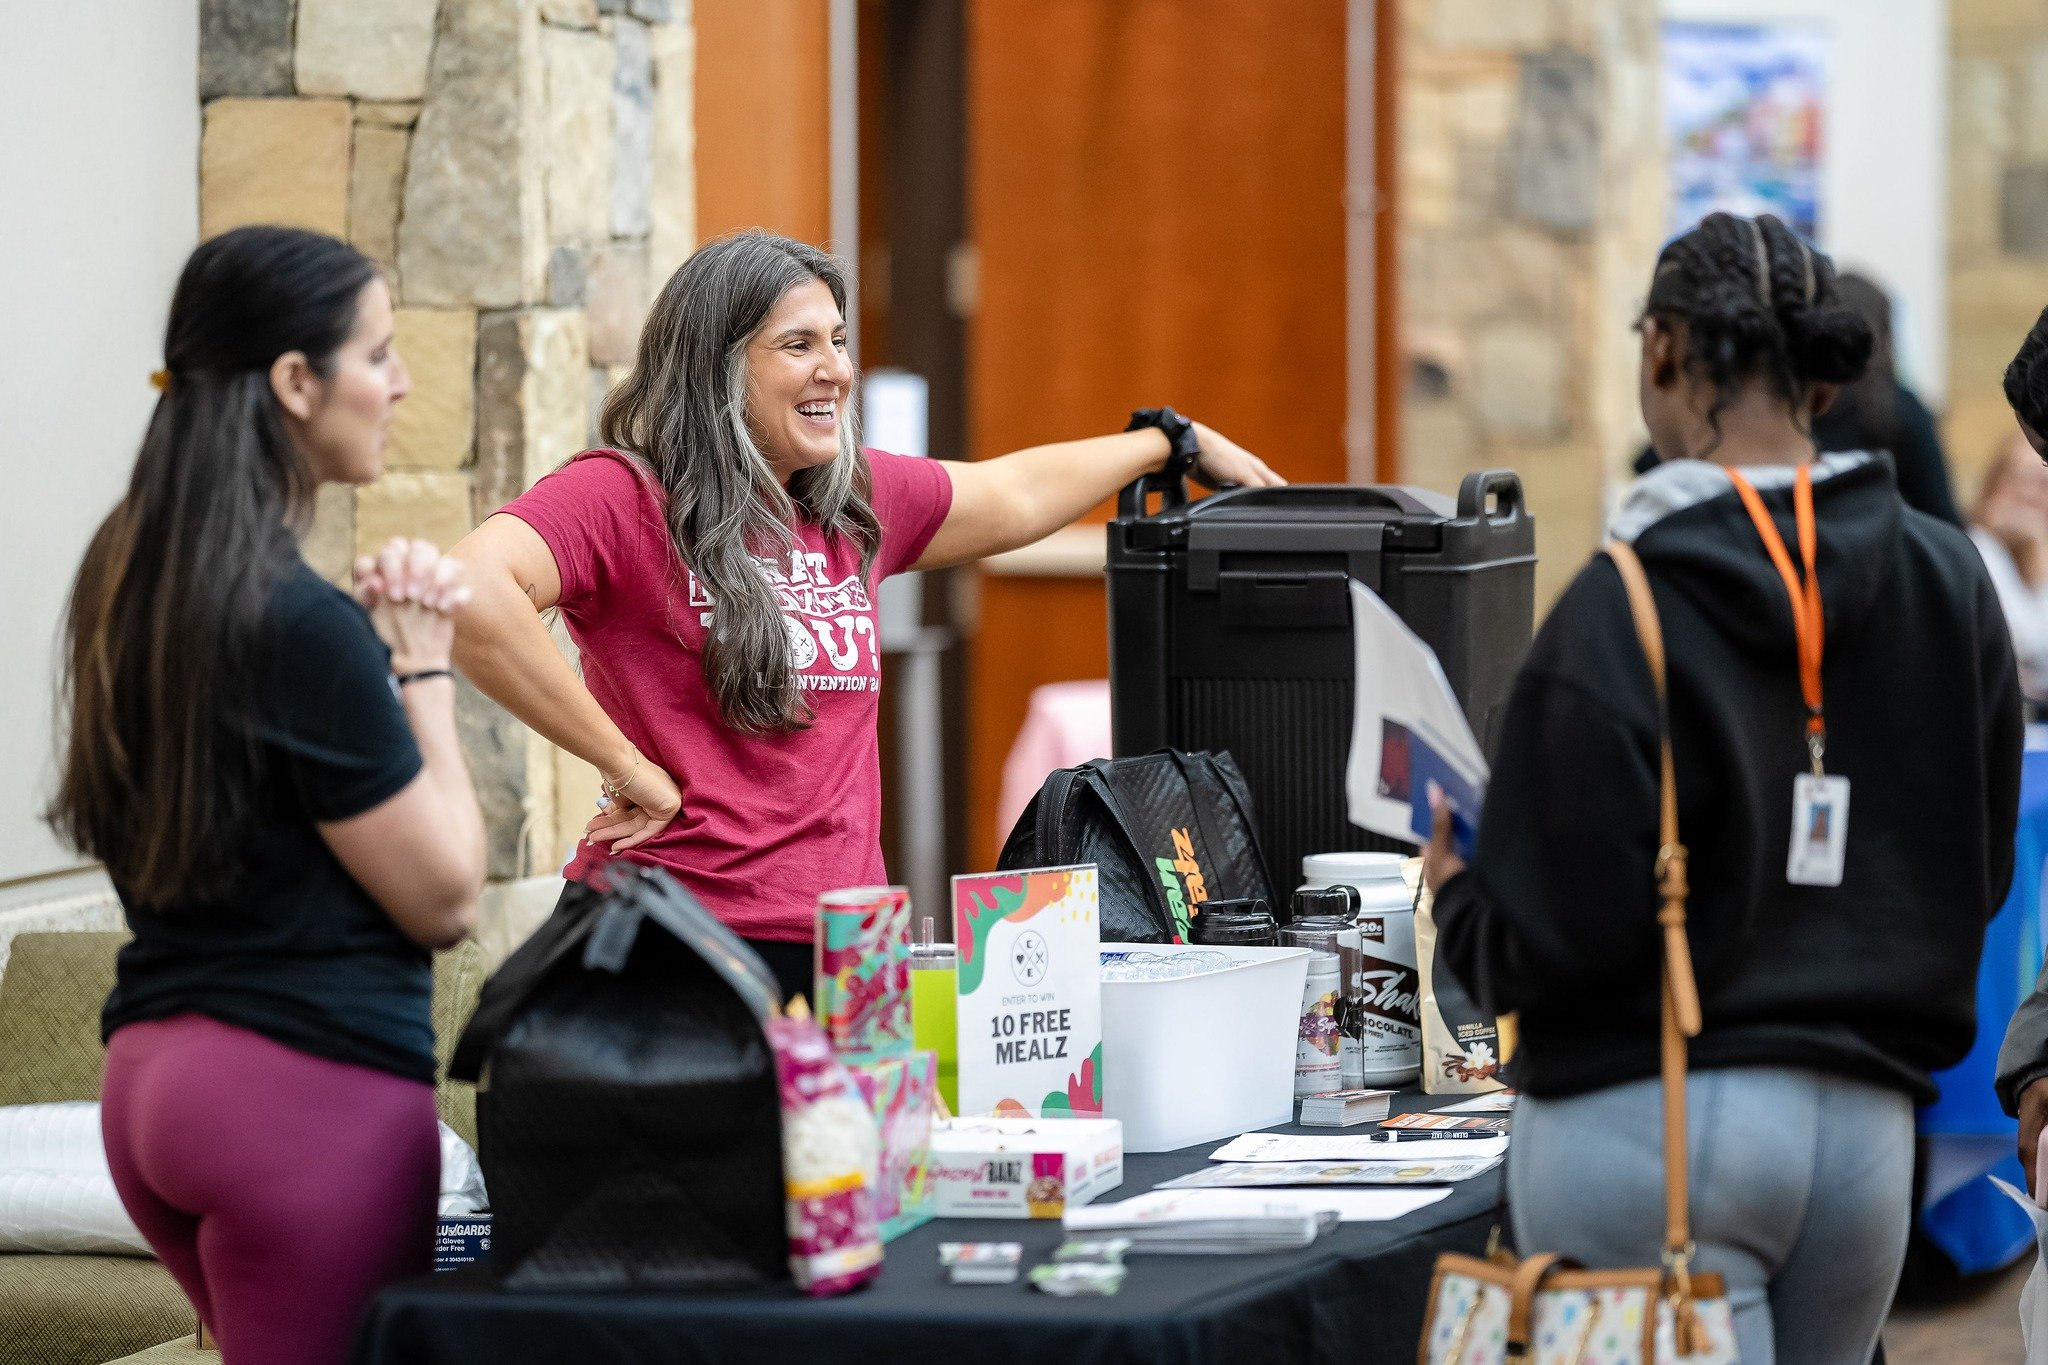 Did you know we host dozens of vendors at our events? It gives you the chance to get your name out there and build your business!